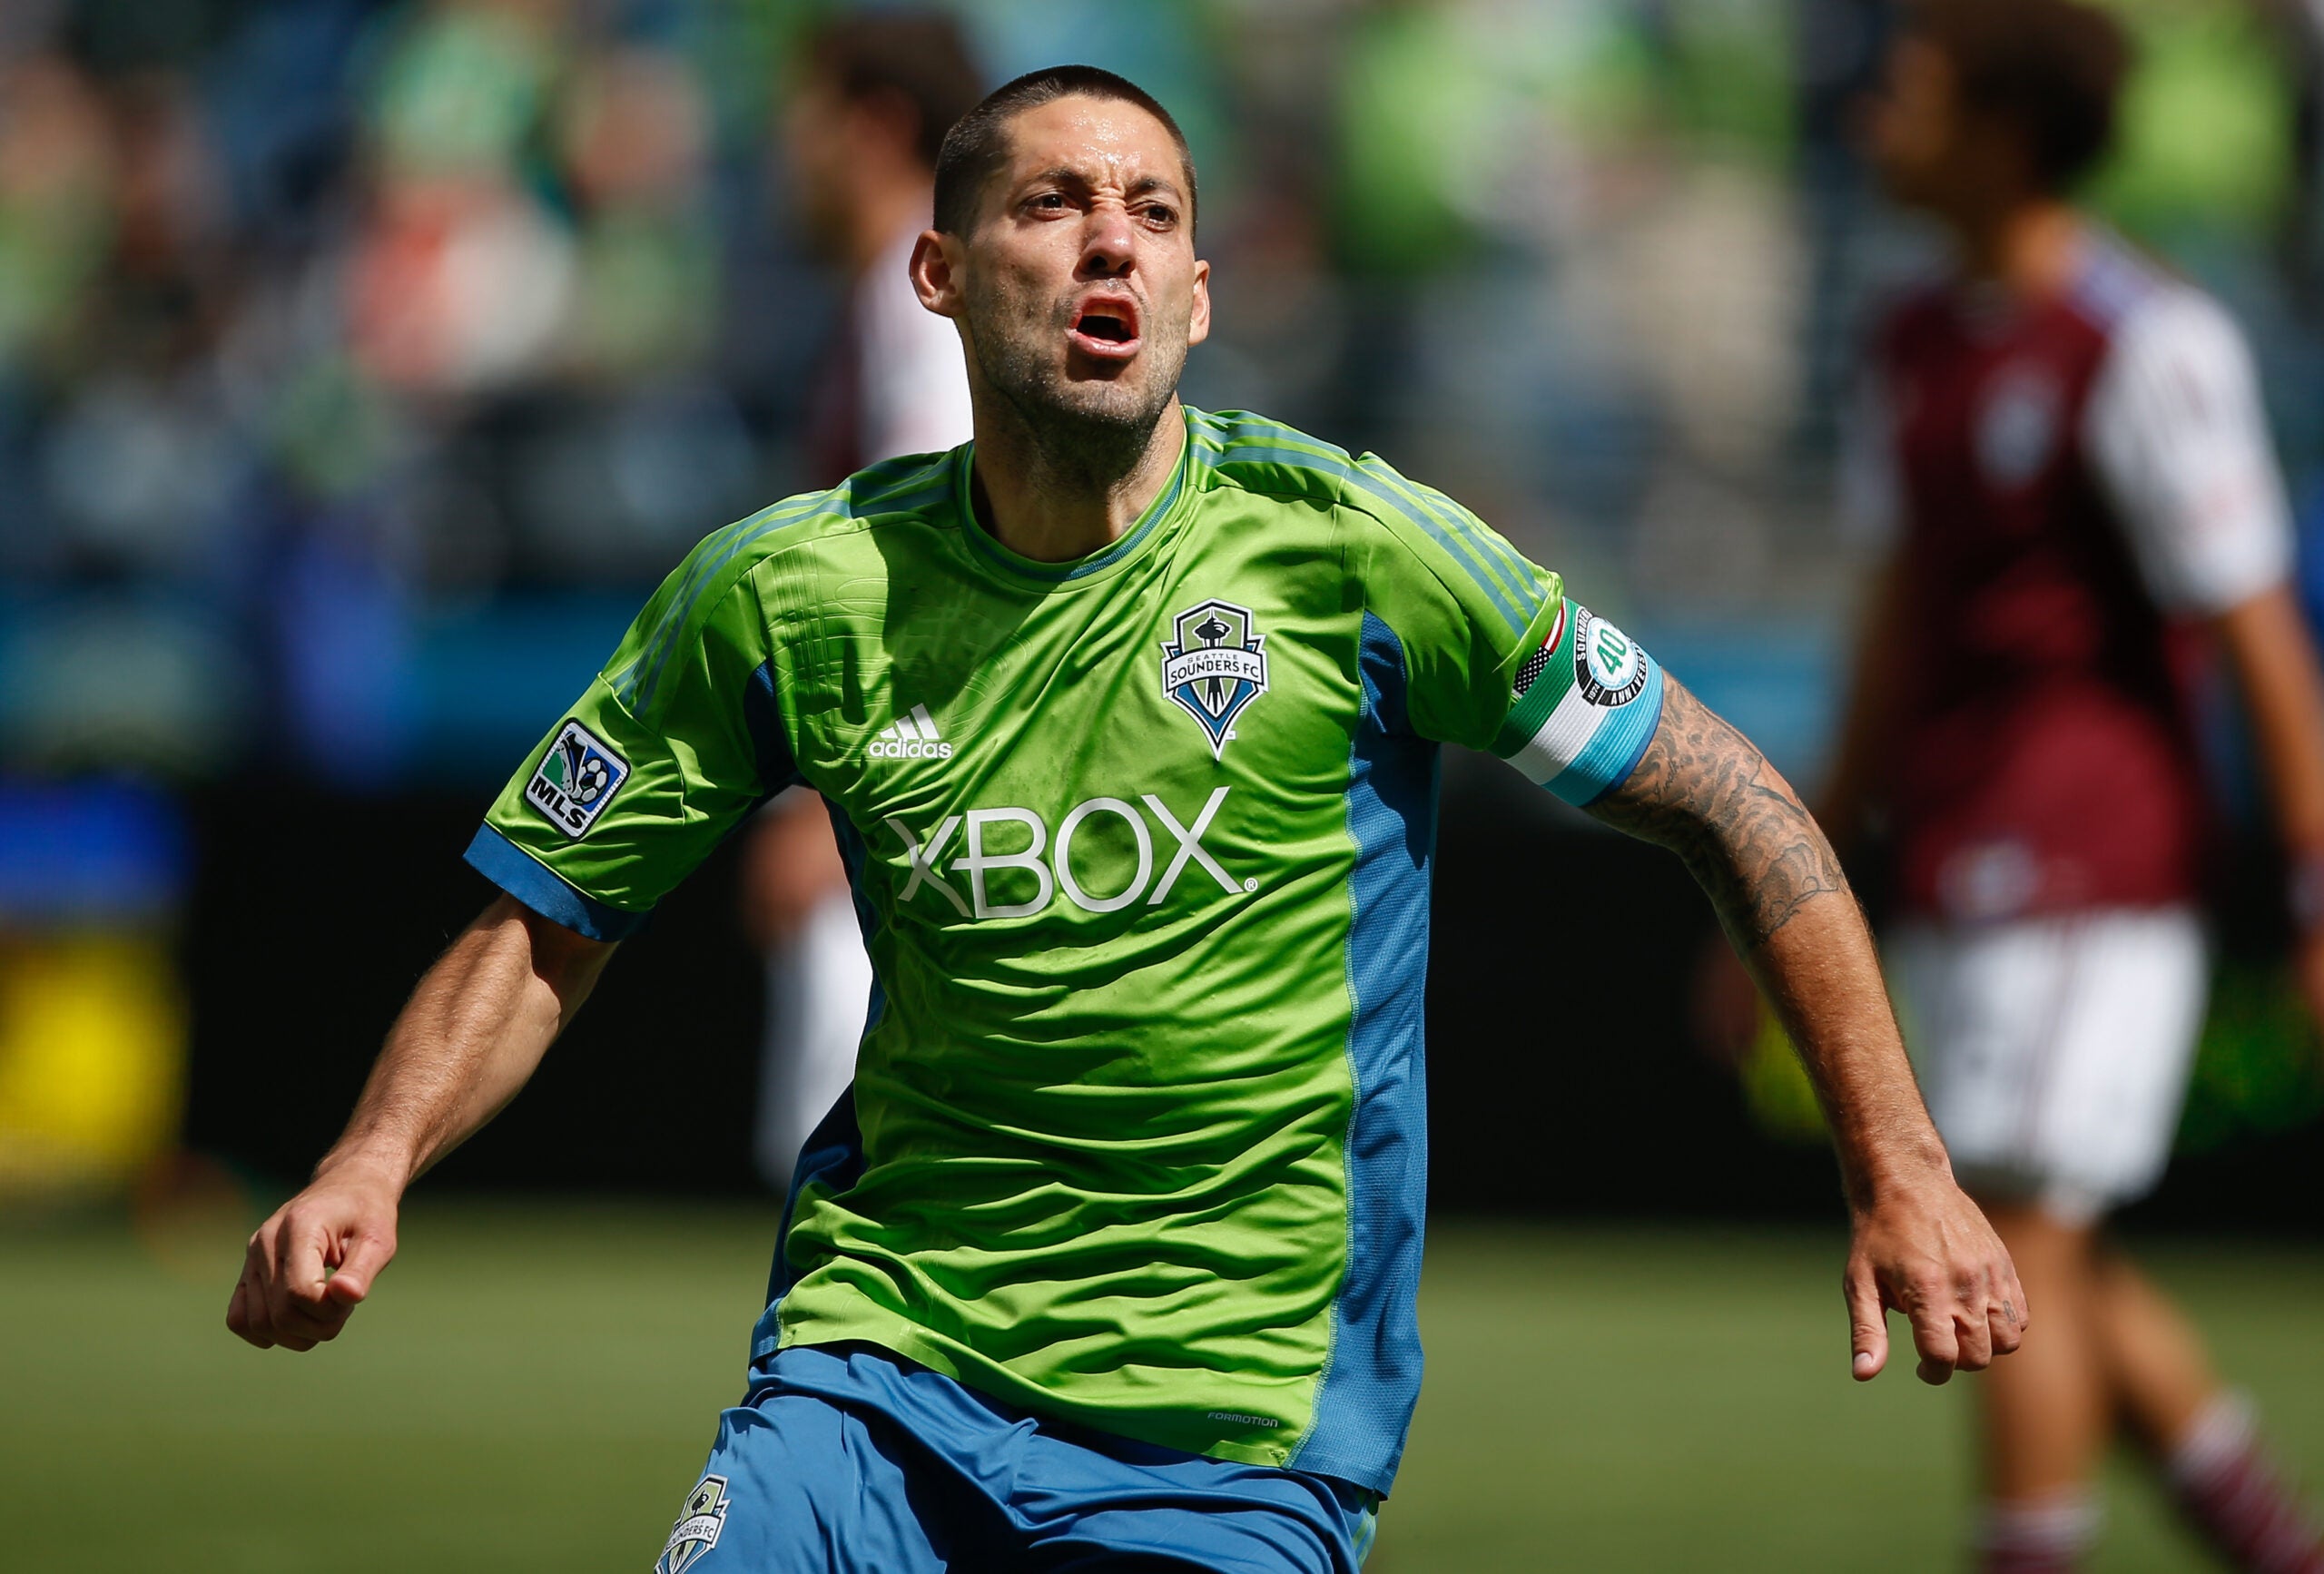 Clint Dempsey claims 'Premier League experience' will see USMNT